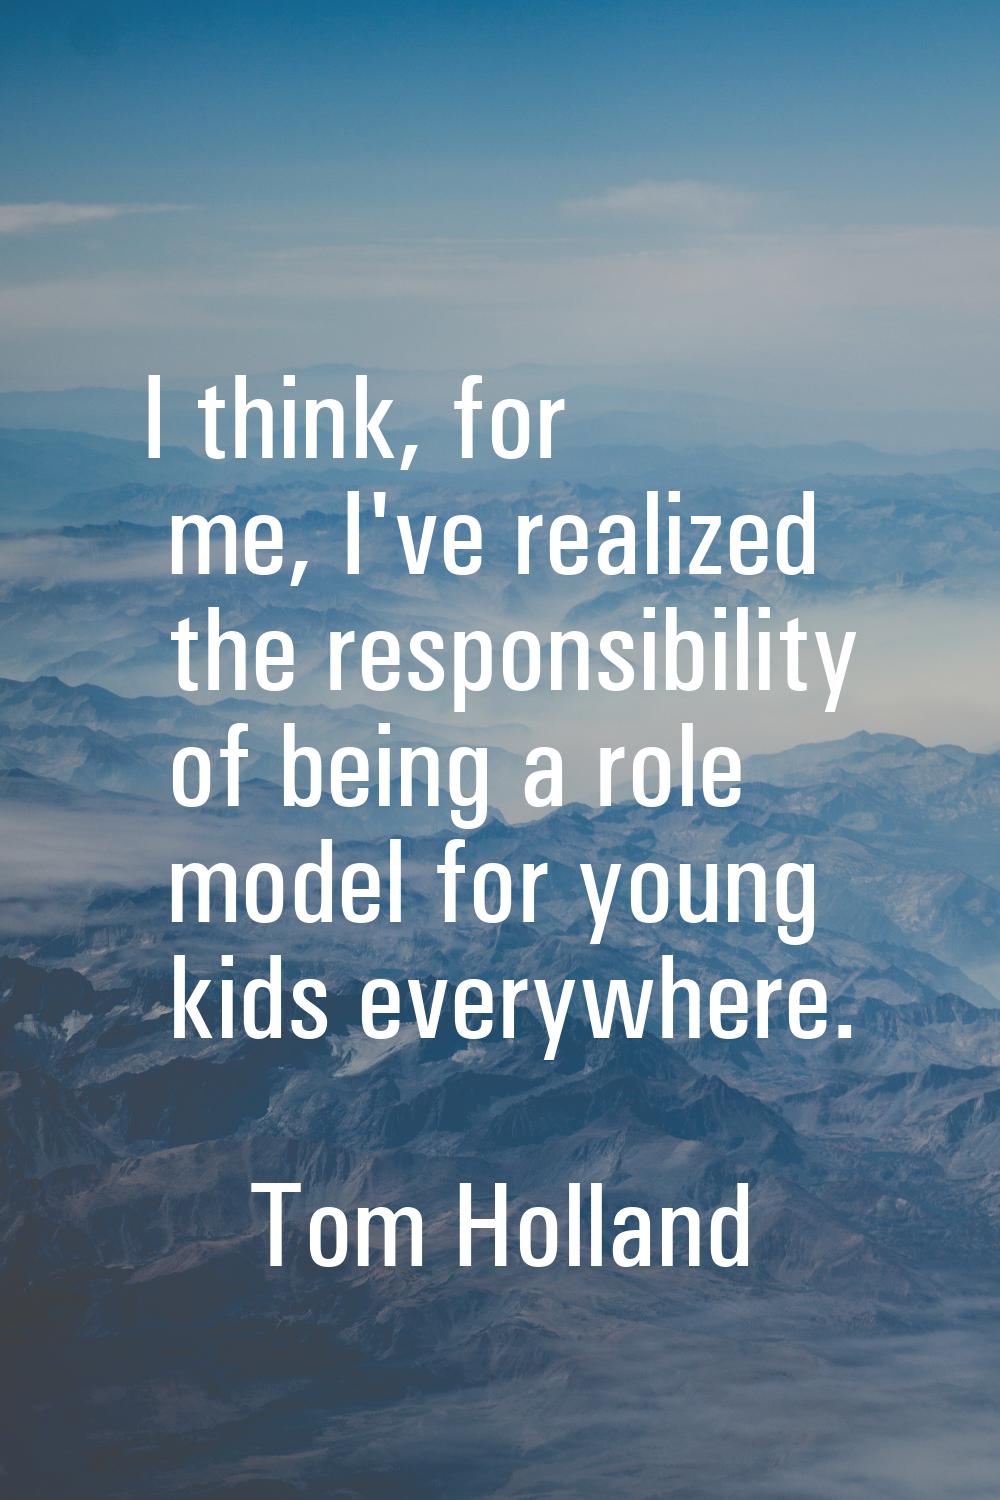 I think, for me, I've realized the responsibility of being a role model for young kids everywhere.